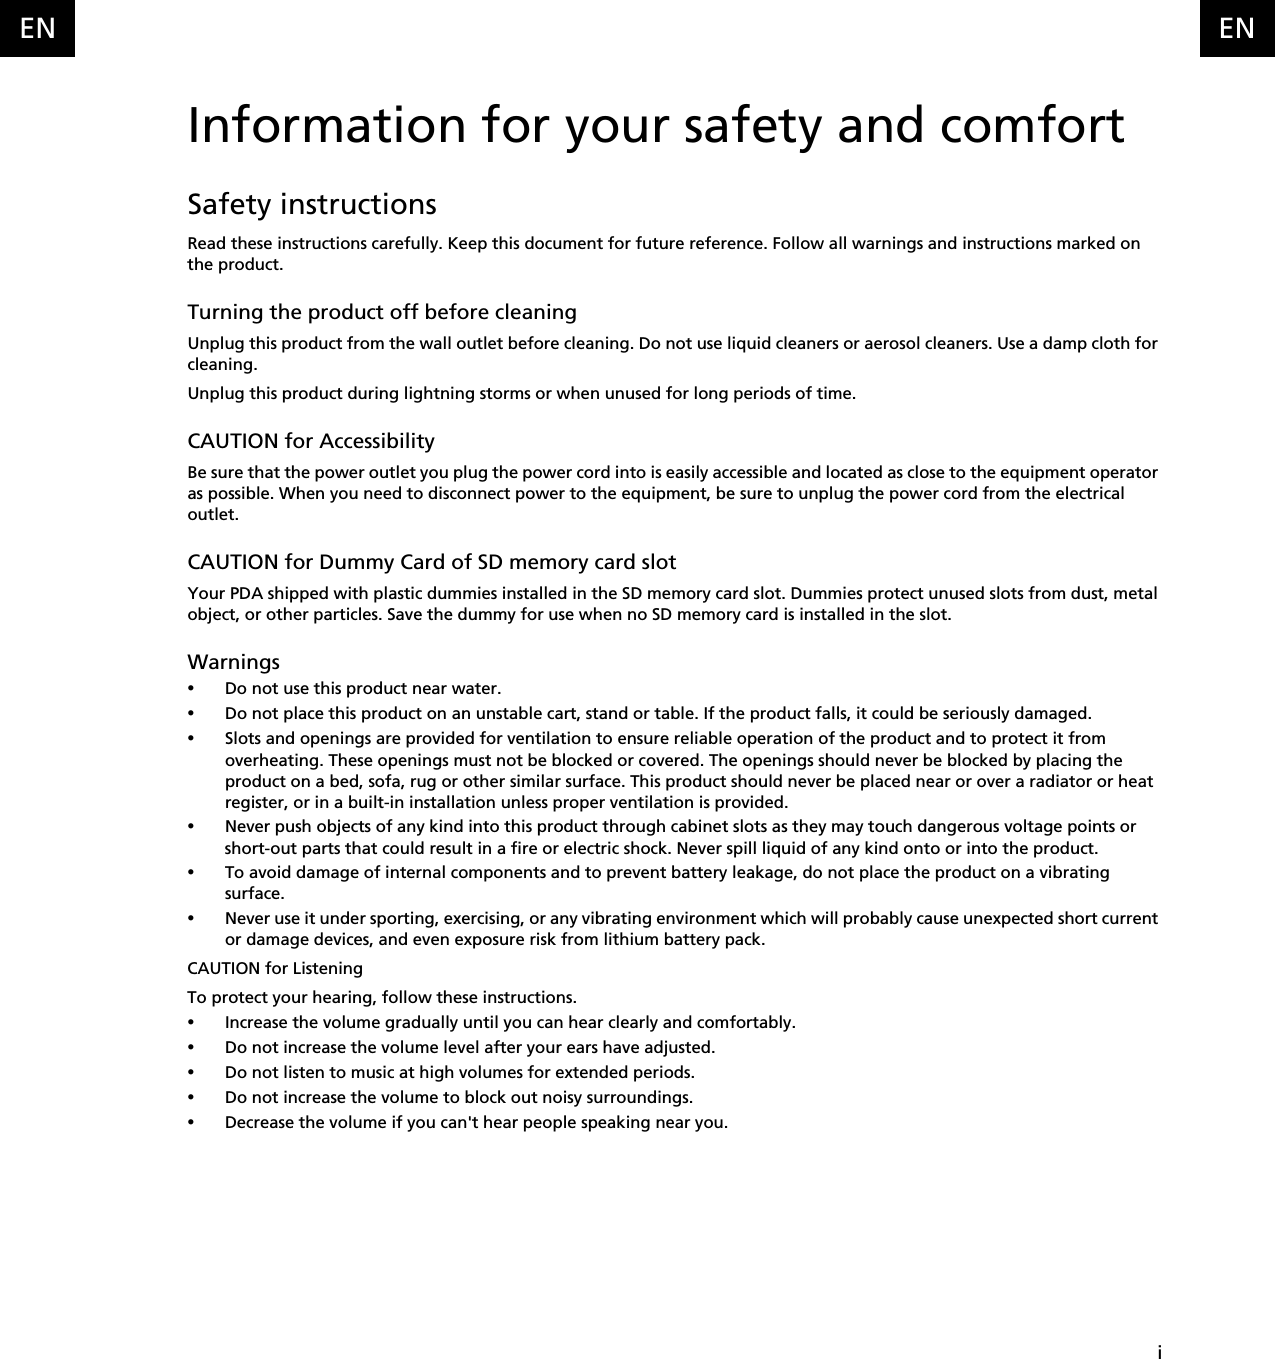    iENENInformation for your safety and comfortSafety instructionsRead these instructions carefully. Keep this document for future reference. Follow all warnings and instructions marked on the product.Turning the product off before cleaningUnplug this product from the wall outlet before cleaning. Do not use liquid cleaners or aerosol cleaners. Use a damp cloth for cleaning.Unplug this product during lightning storms or when unused for long periods of time.CAUTION for AccessibilityBe sure that the power outlet you plug the power cord into is easily accessible and located as close to the equipment operator as possible. When you need to disconnect power to the equipment, be sure to unplug the power cord from the electrical outlet.CAUTION for Dummy Card of SD memory card slotYour PDA shipped with plastic dummies installed in the SD memory card slot. Dummies protect unused slots from dust, metal object, or other particles. Save the dummy for use when no SD memory card is installed in the slot.Warnings•Do not use this product near water.•Do not place this product on an unstable cart, stand or table. If the product falls, it could be seriously damaged.•Slots and openings are provided for ventilation to ensure reliable operation of the product and to protect it from overheating. These openings must not be blocked or covered. The openings should never be blocked by placing the product on a bed, sofa, rug or other similar surface. This product should never be placed near or over a radiator or heat register, or in a built-in installation unless proper ventilation is provided.•Never push objects of any kind into this product through cabinet slots as they may touch dangerous voltage points or short-out parts that could result in a fire or electric shock. Never spill liquid of any kind onto or into the product.•To avoid damage of internal components and to prevent battery leakage, do not place the product on a vibrating surface.•Never use it under sporting, exercising, or any vibrating environment which will probably cause unexpected short current or damage devices, and even exposure risk from lithium battery pack.CAUTION for ListeningTo protect your hearing, follow these instructions.•Increase the volume gradually until you can hear clearly and comfortably.•Do not increase the volume level after your ears have adjusted.•Do not listen to music at high volumes for extended periods.•Do not increase the volume to block out noisy surroundings.•Decrease the volume if you can&apos;t hear people speaking near you.